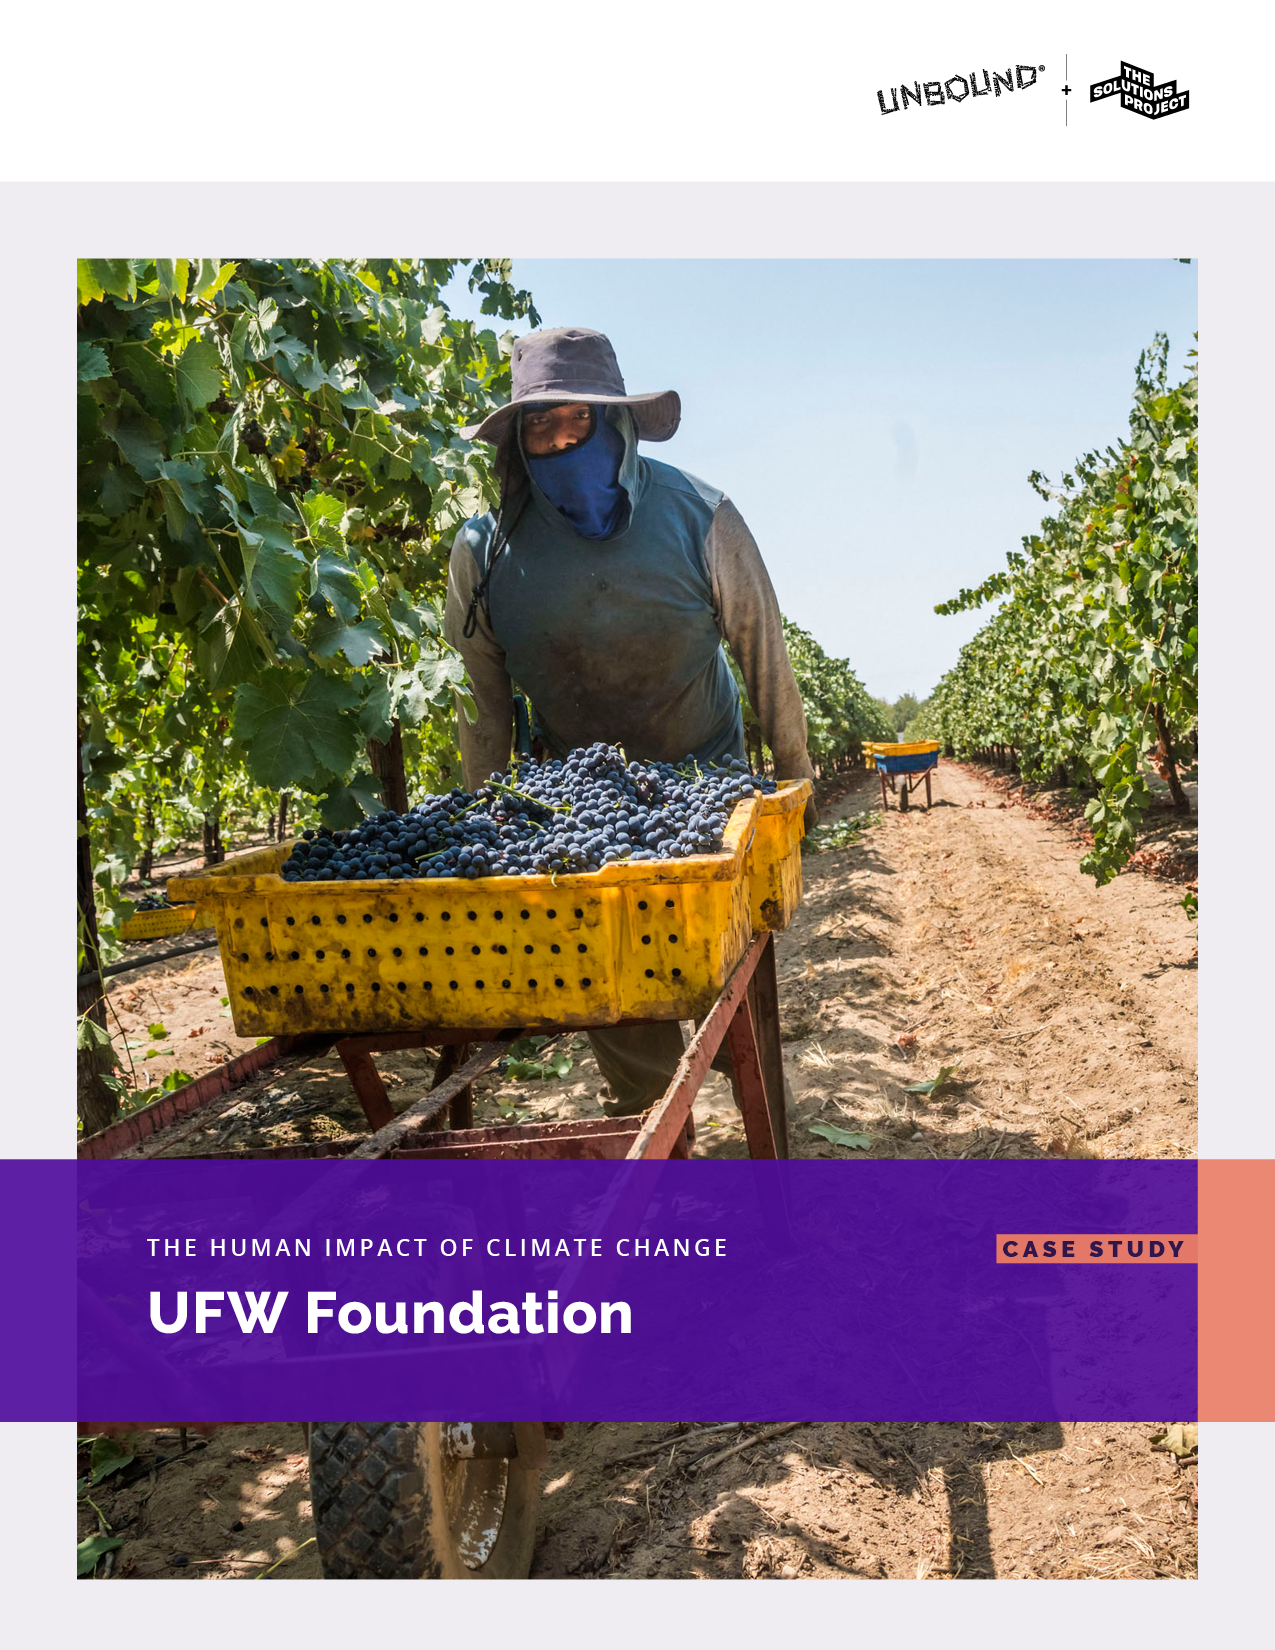 UFW Foundation case study cover page